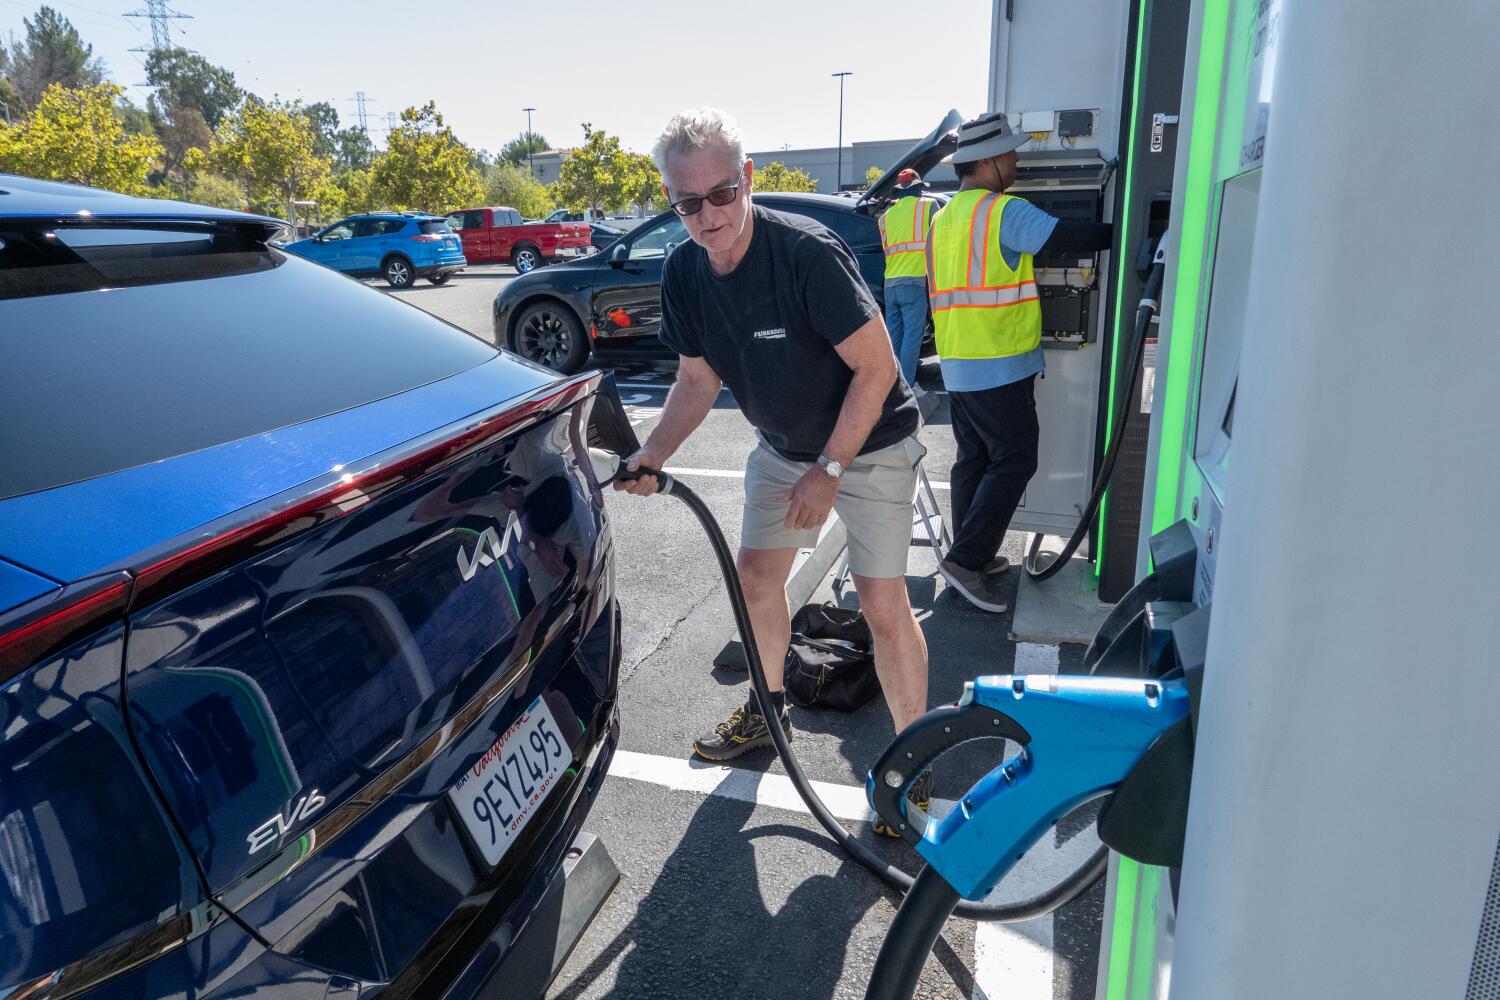 Can California pull off the epic transition to EVs? Read our coverage here